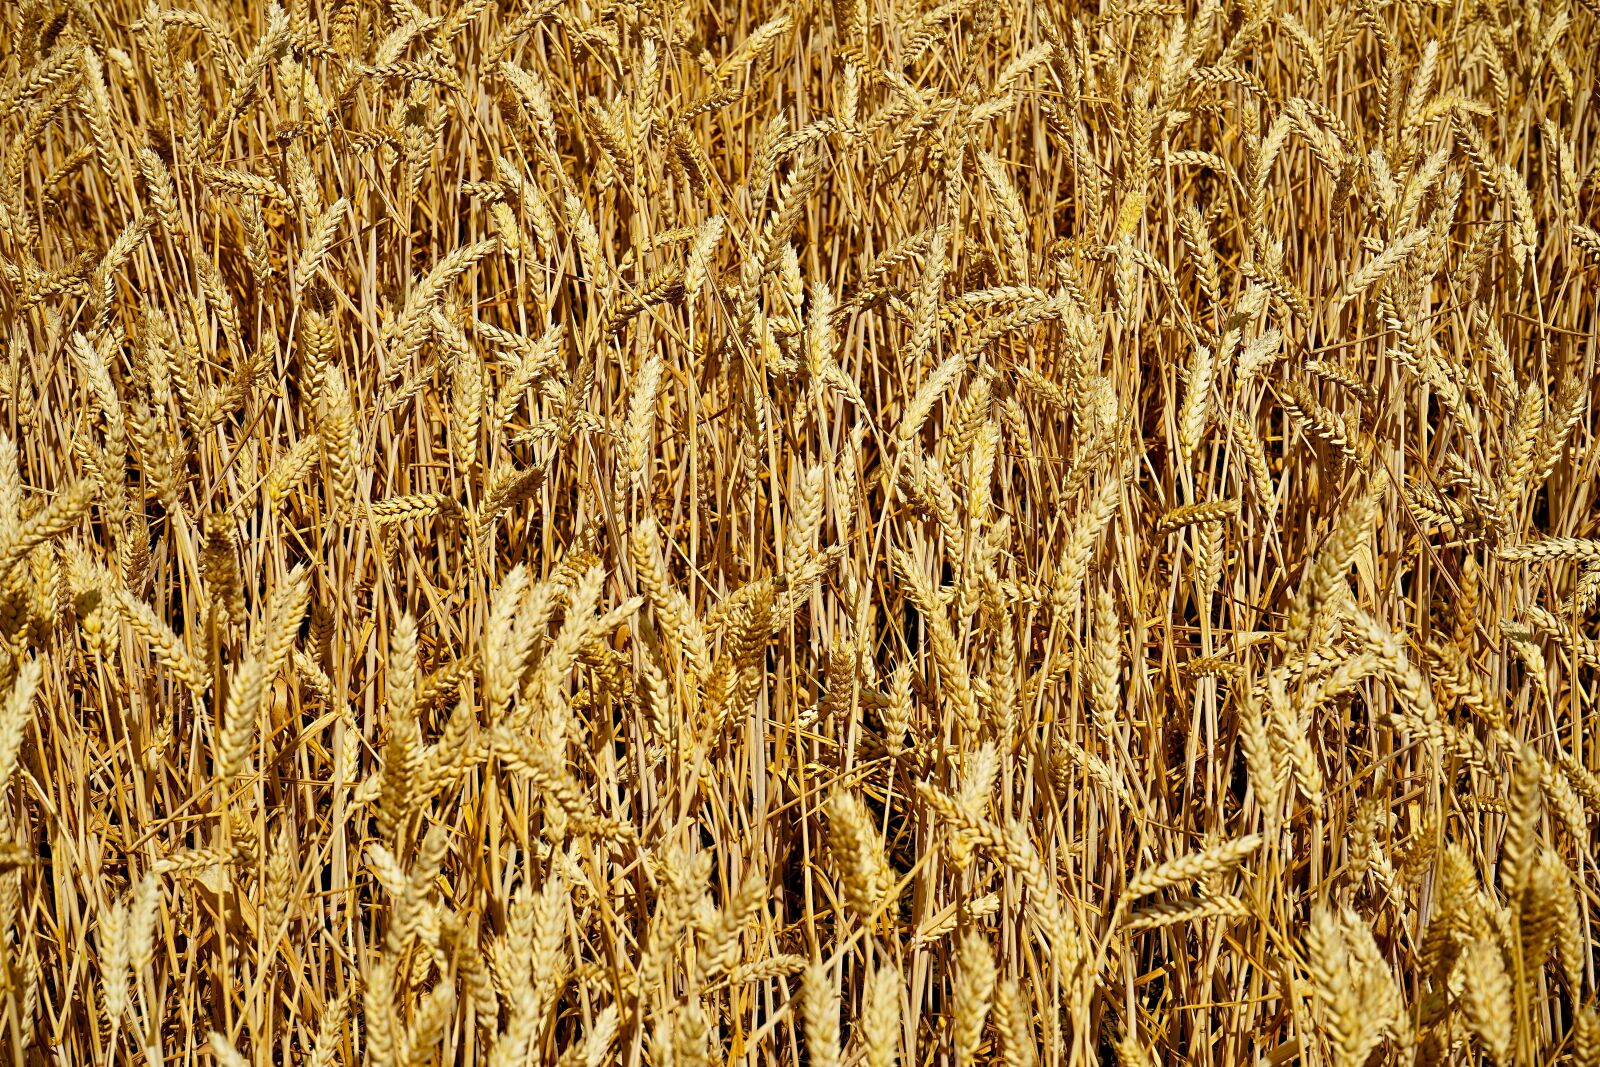 Sony a7 sample photo. Corn, field, agriculture photography